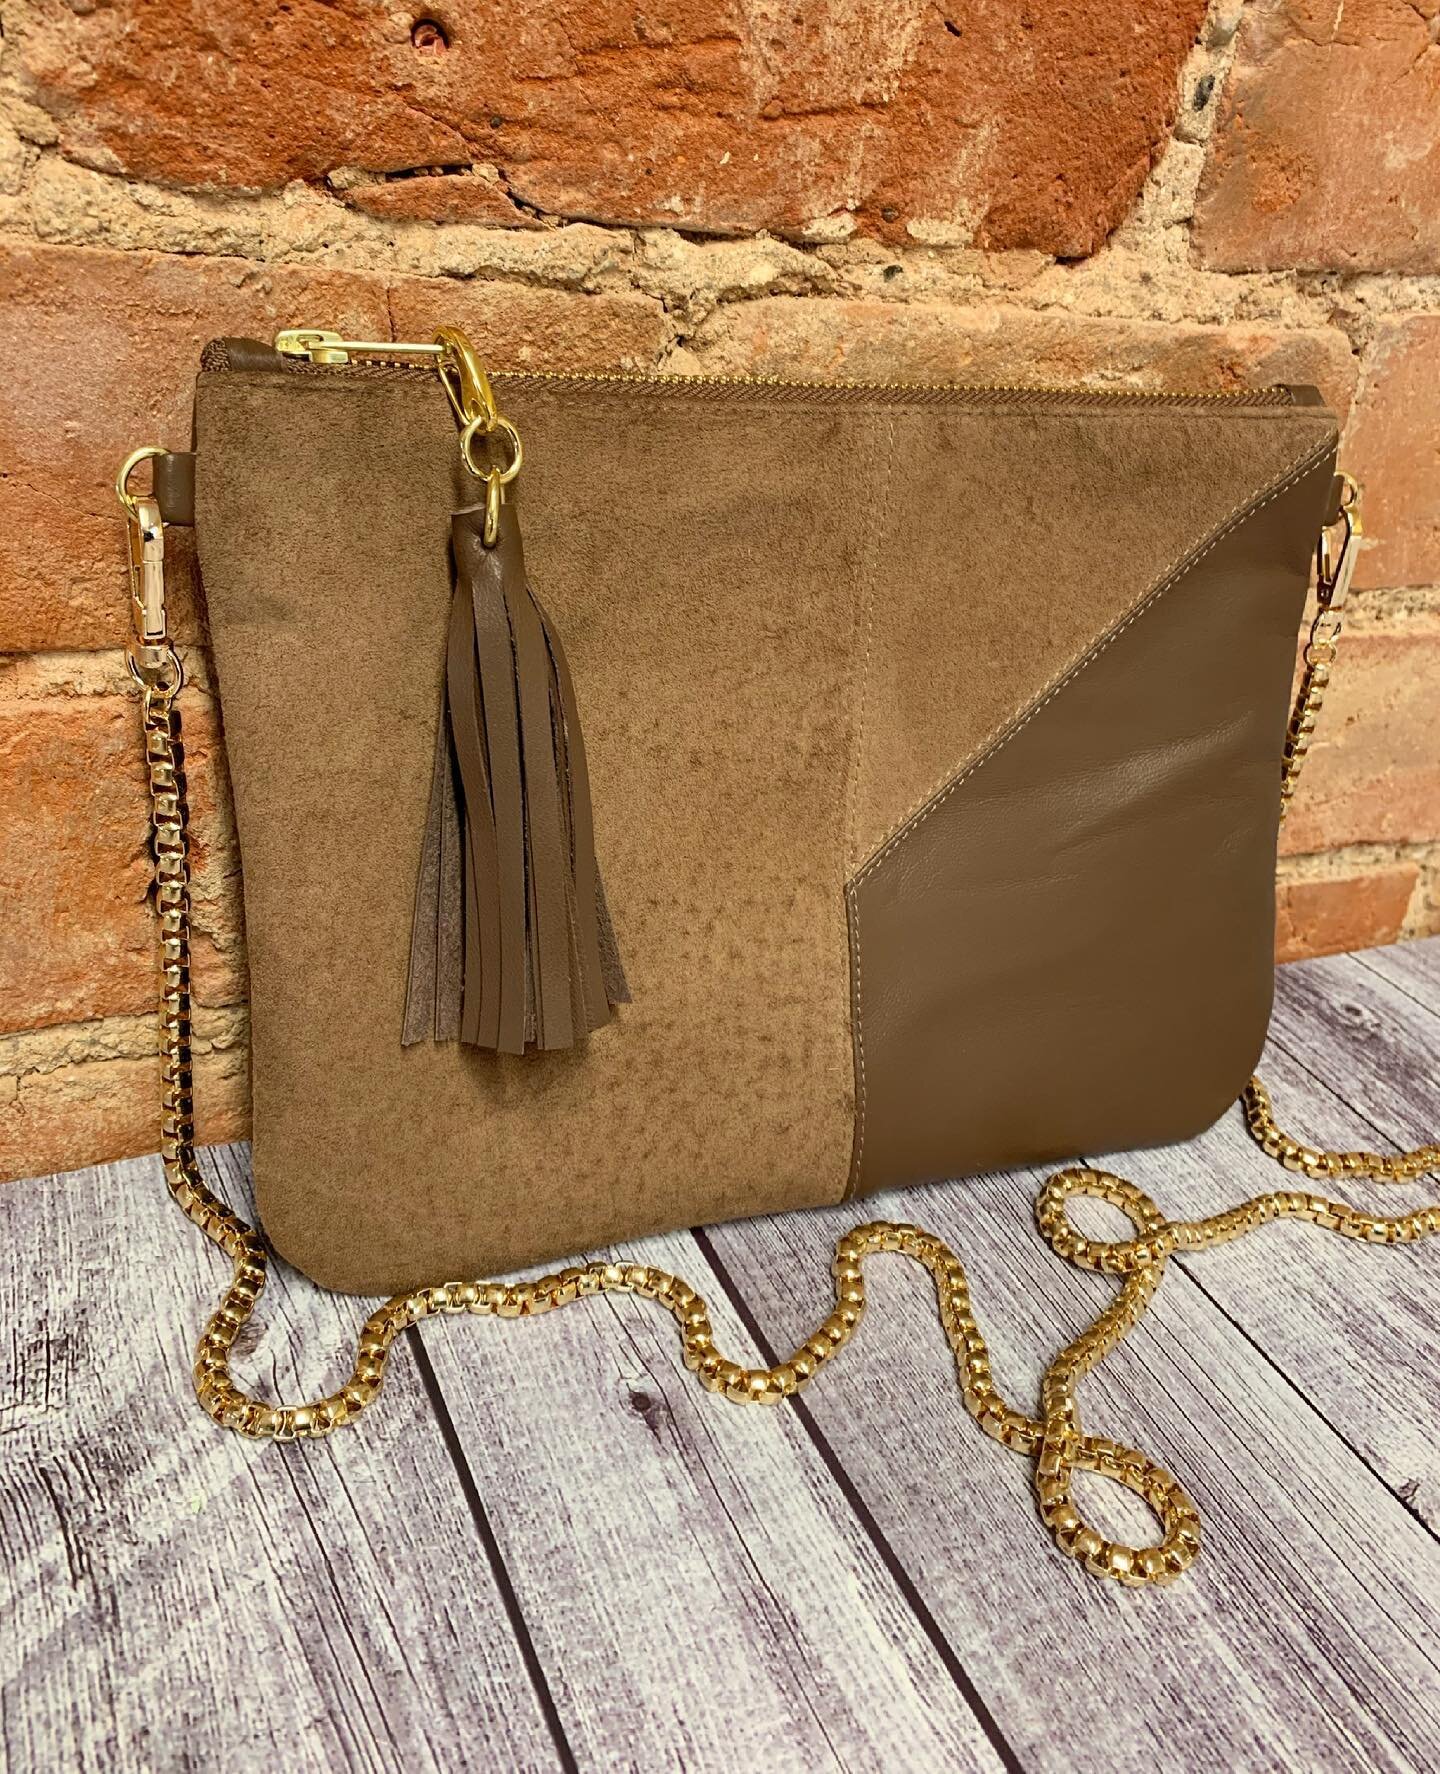 Brown leather and suede panelled clutch! This has to be one of my favourites! A completely timeless colour and design of bag. 
Everyone needs a brown staple clutch in their wardrobe. 
This exact one is ready and waiting online now!! 
Only one availab